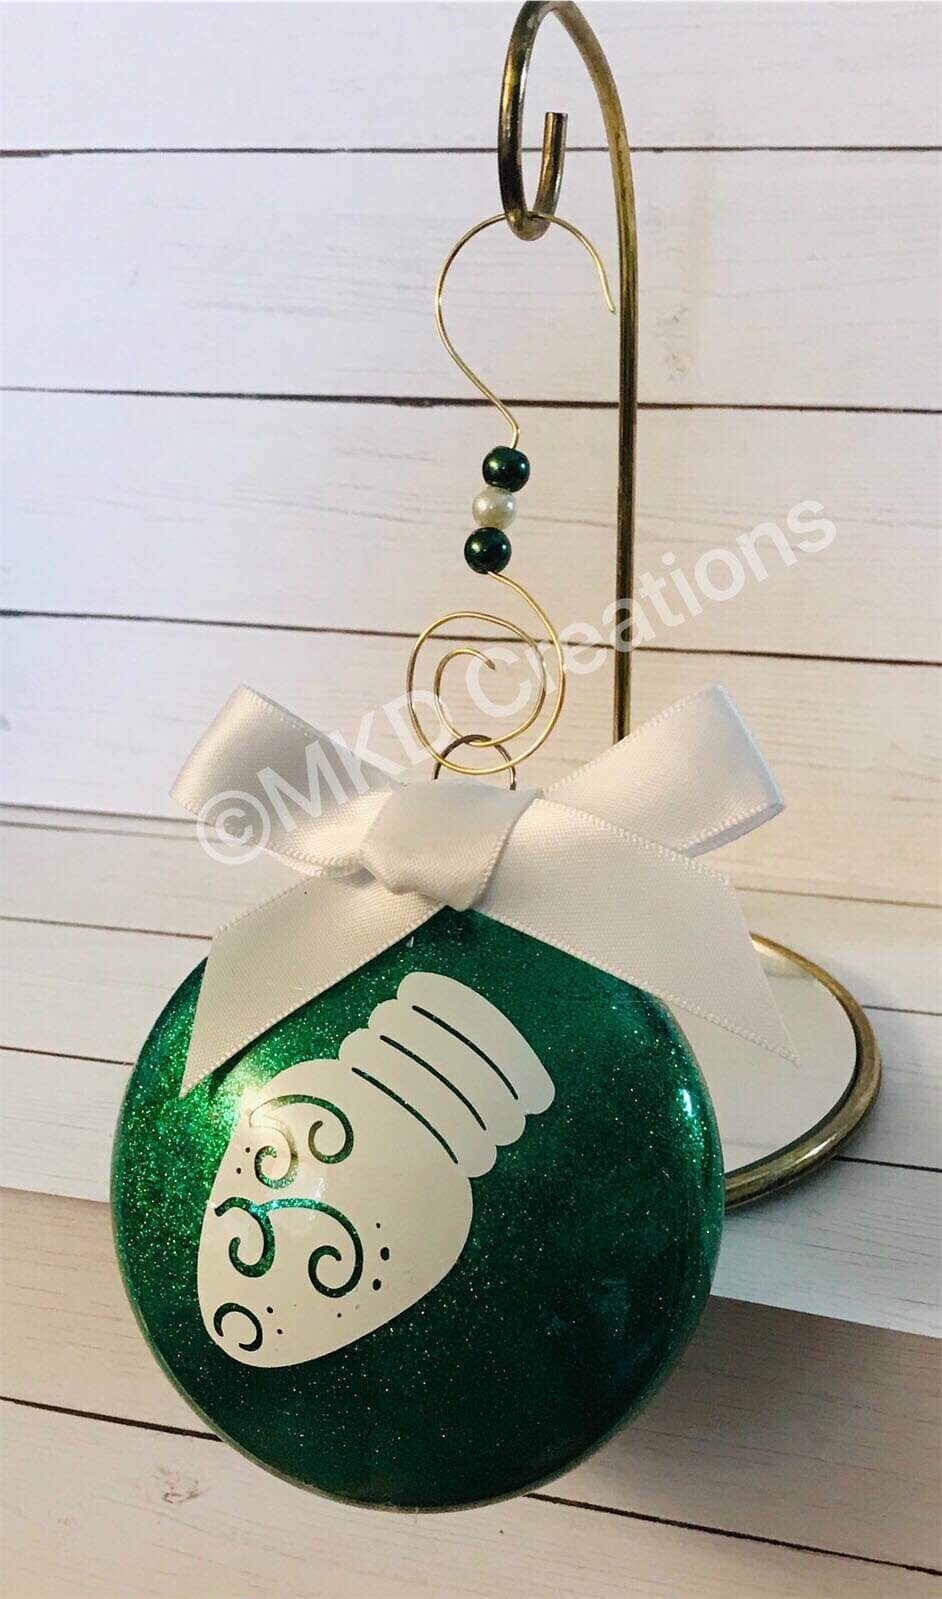 Ornament light bulb Glittered Ornaments | Plastic 3 inch disks filled with Green glitter with hook & bow | Christmas Ornament